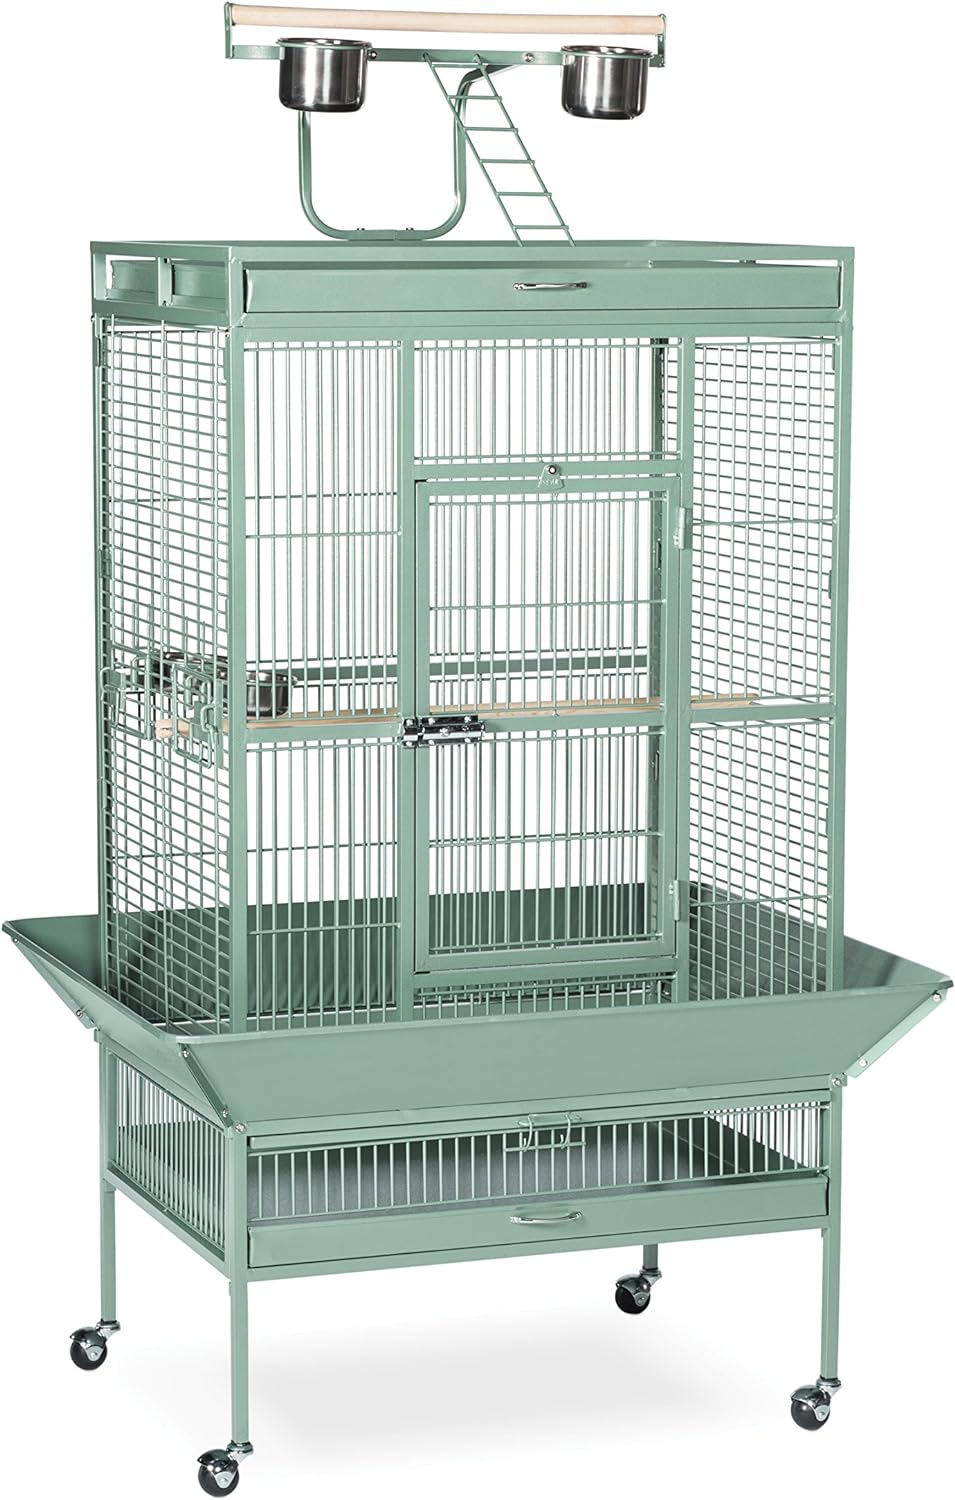 Prevue Pet Products Wrought Iron Select Bird Cage Sage Green